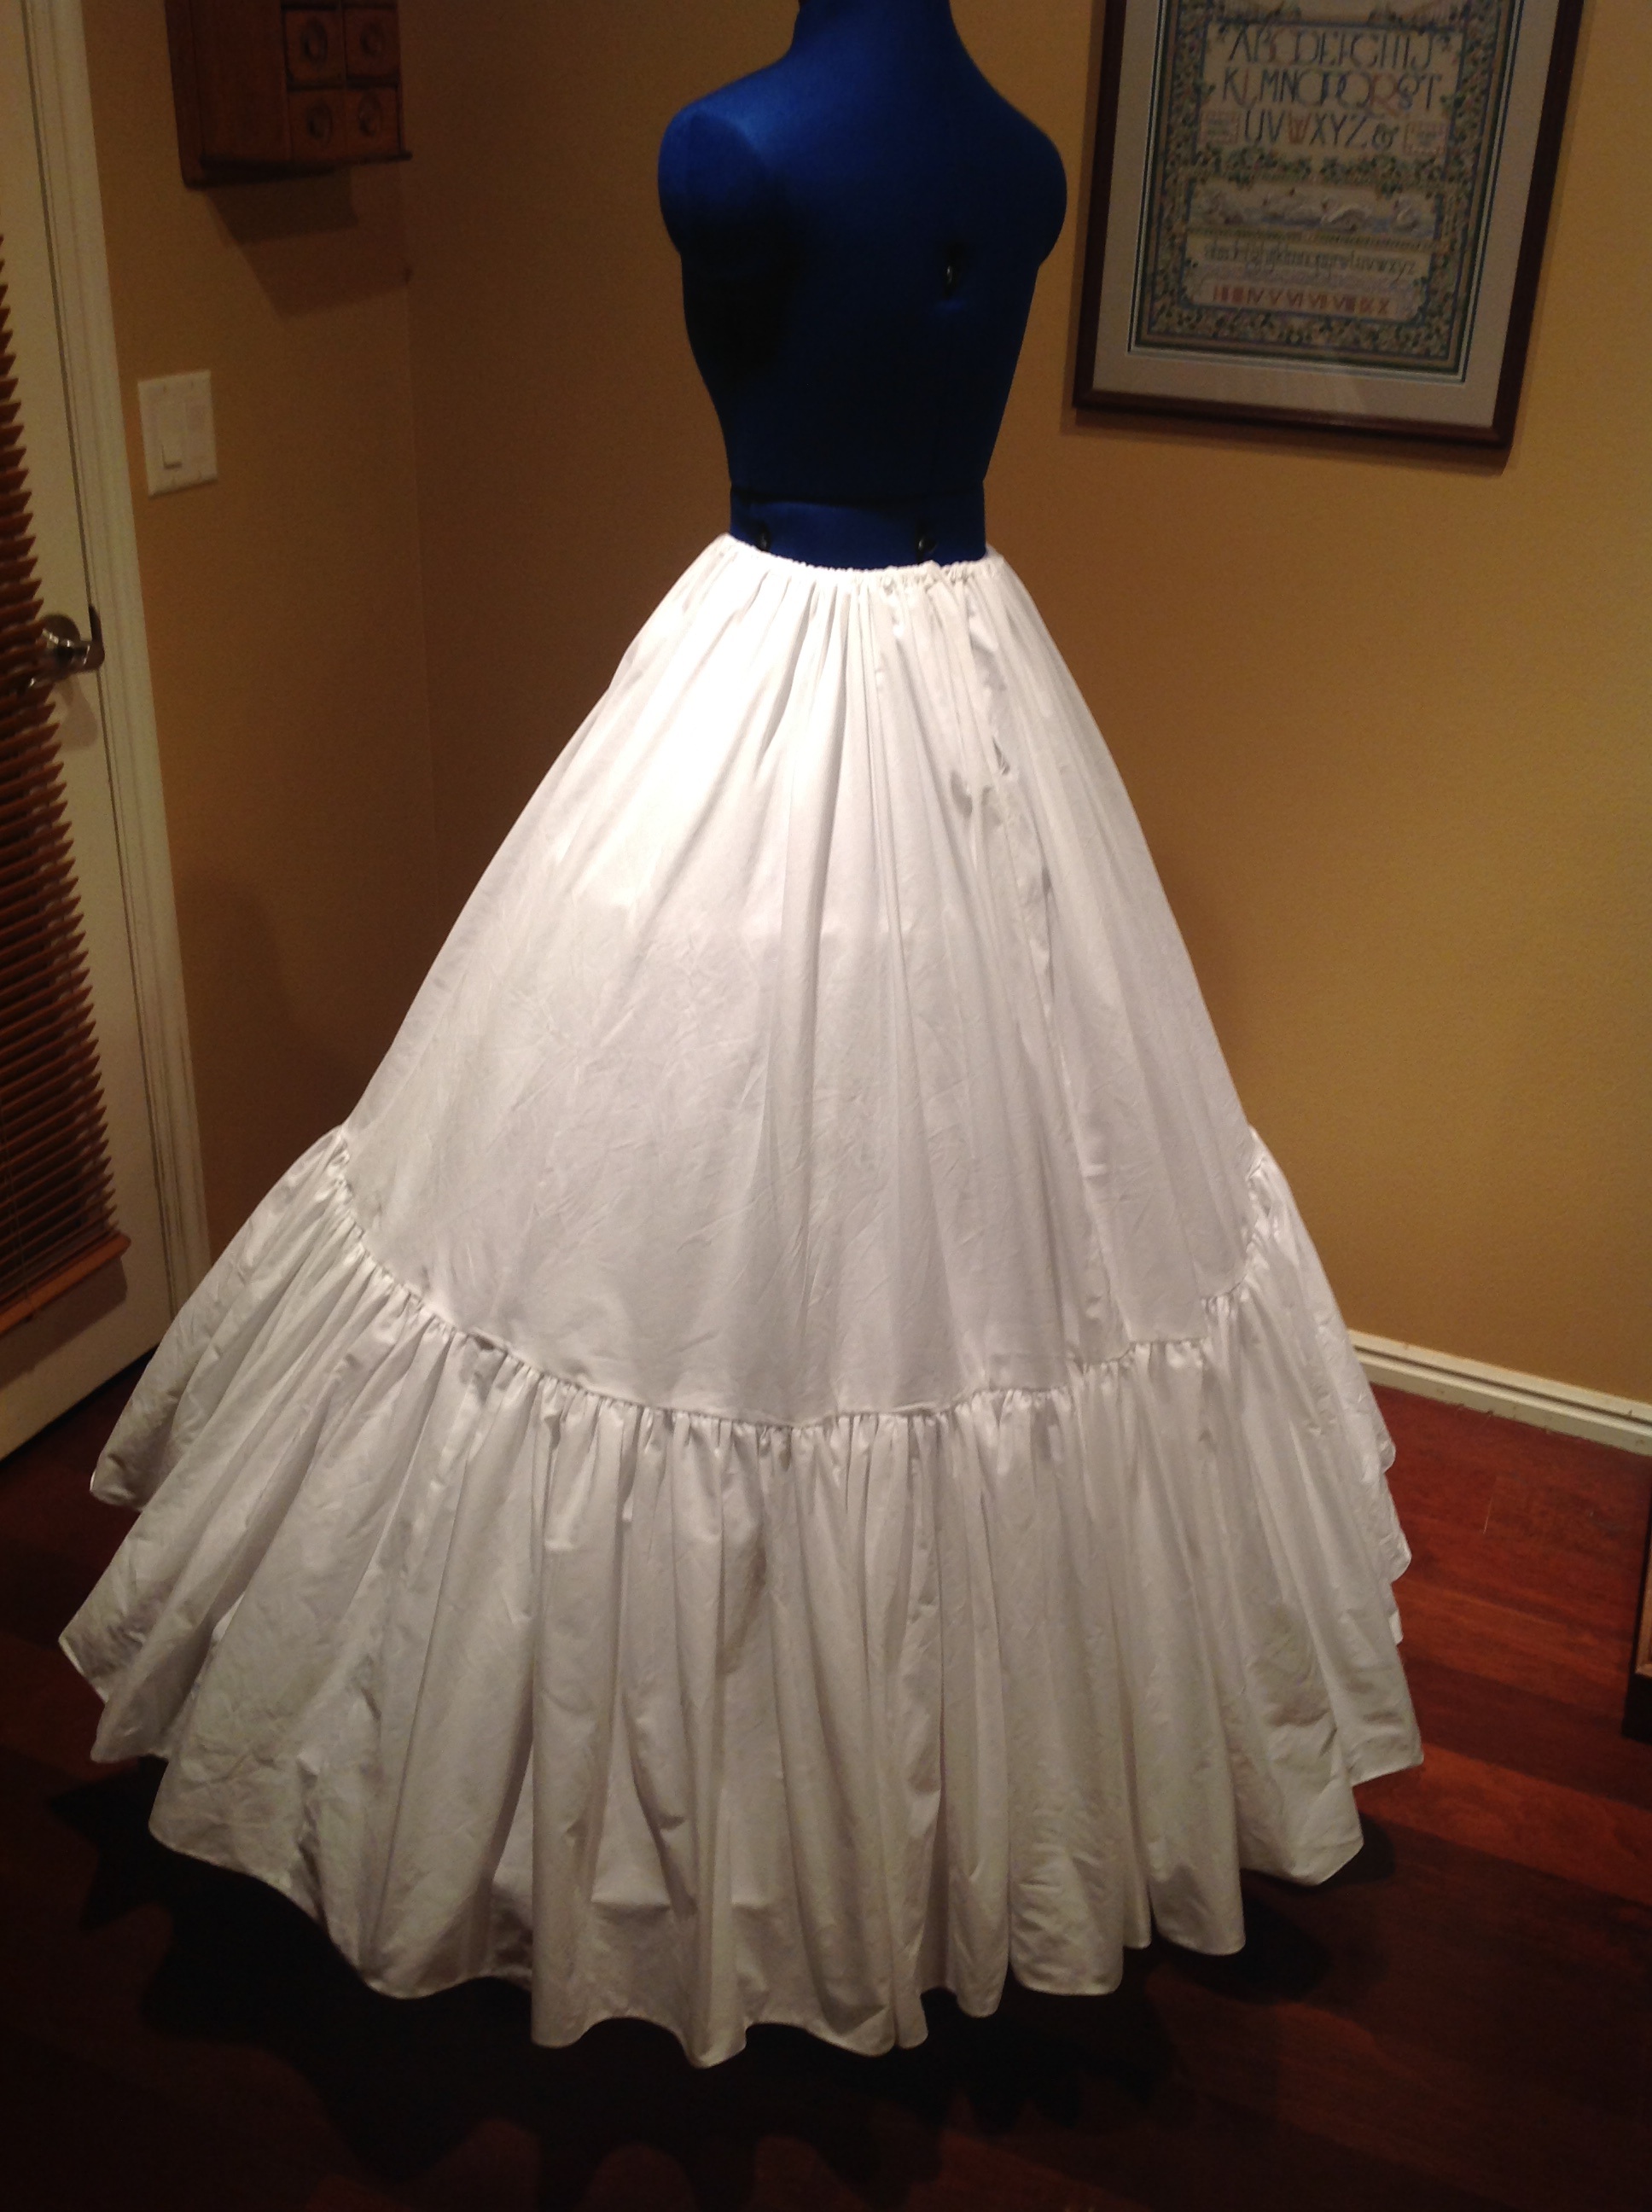 How to Sew PETTICOAT/UNDERSKIRT for BALL GOWNS - YouTube